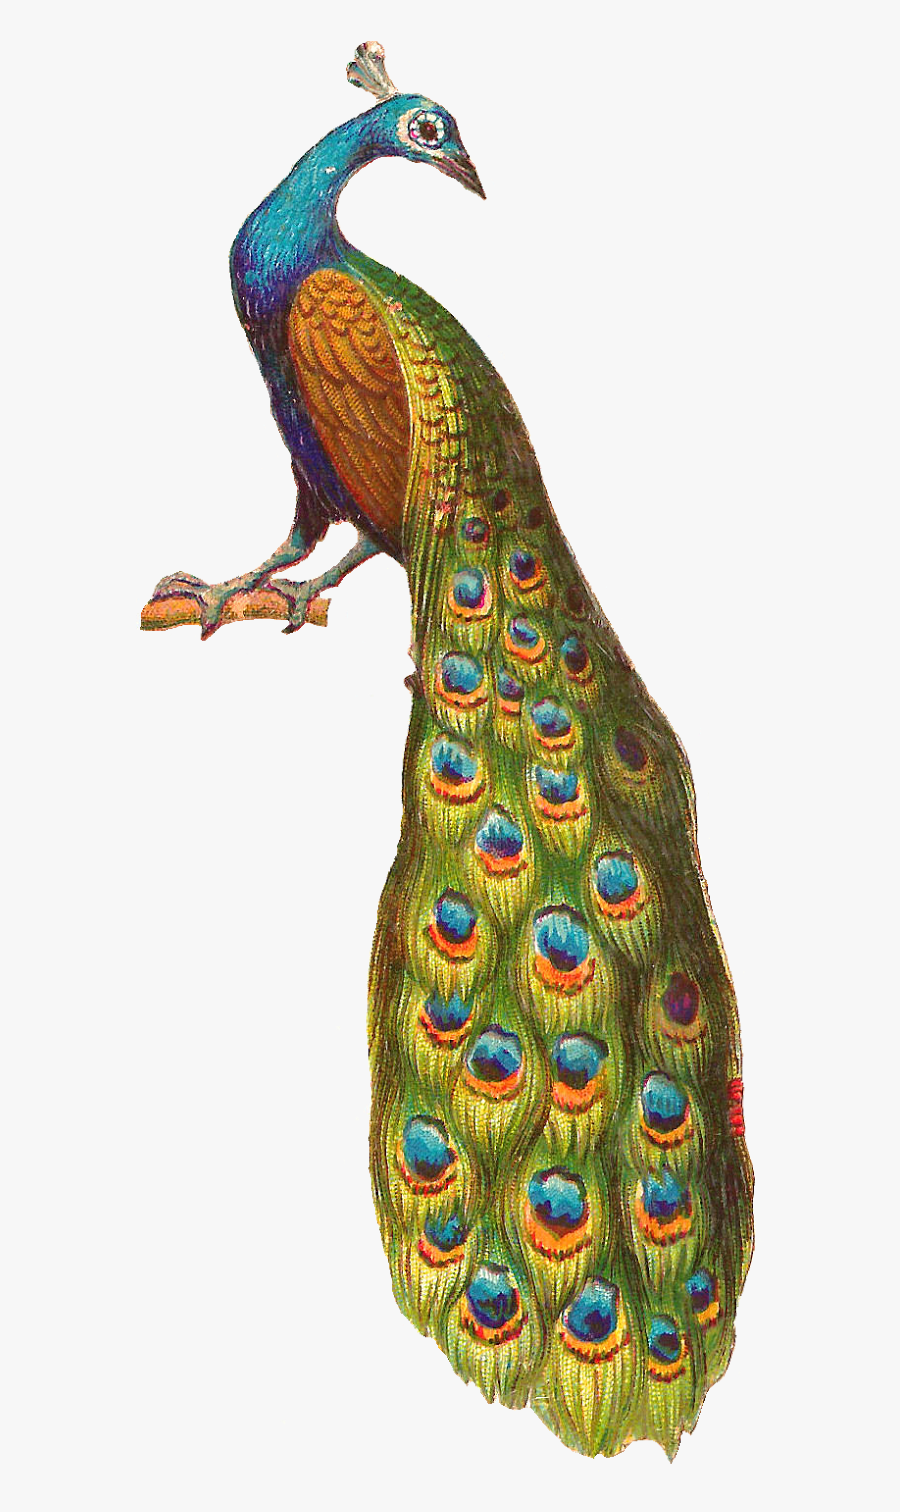 Peacock Png Sitting On Tree - Vintage Peacock Png, Transparent Clipart